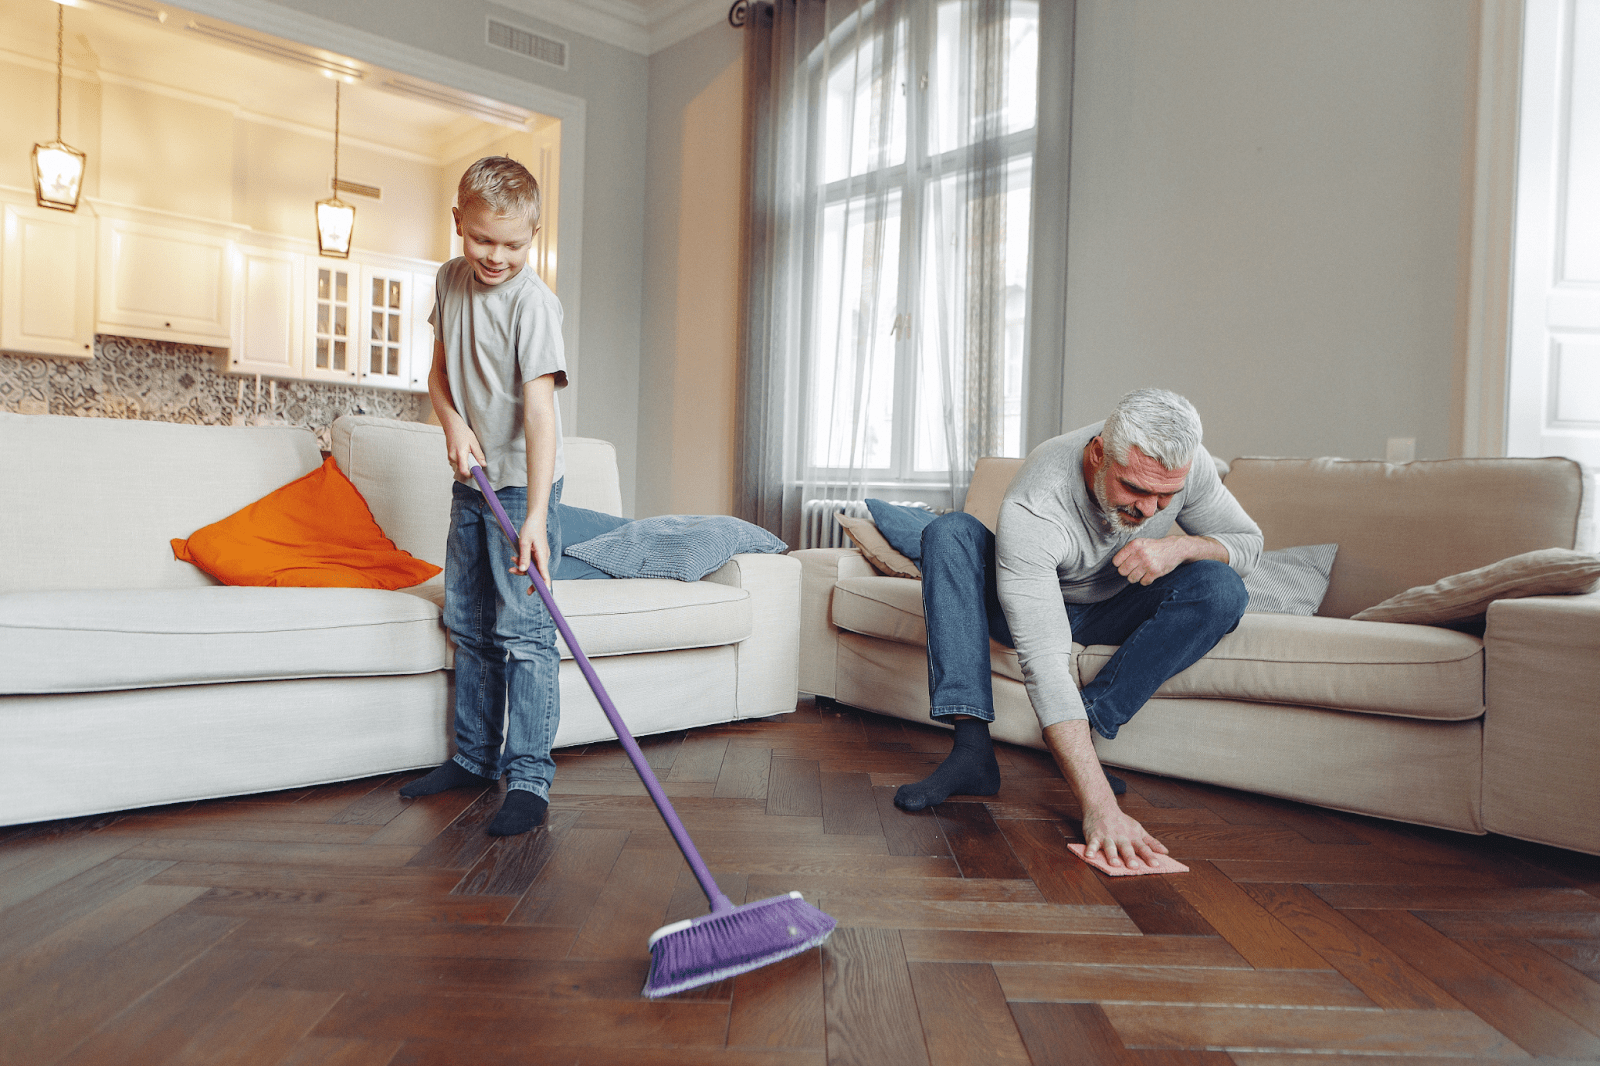 spend time with family cleaning